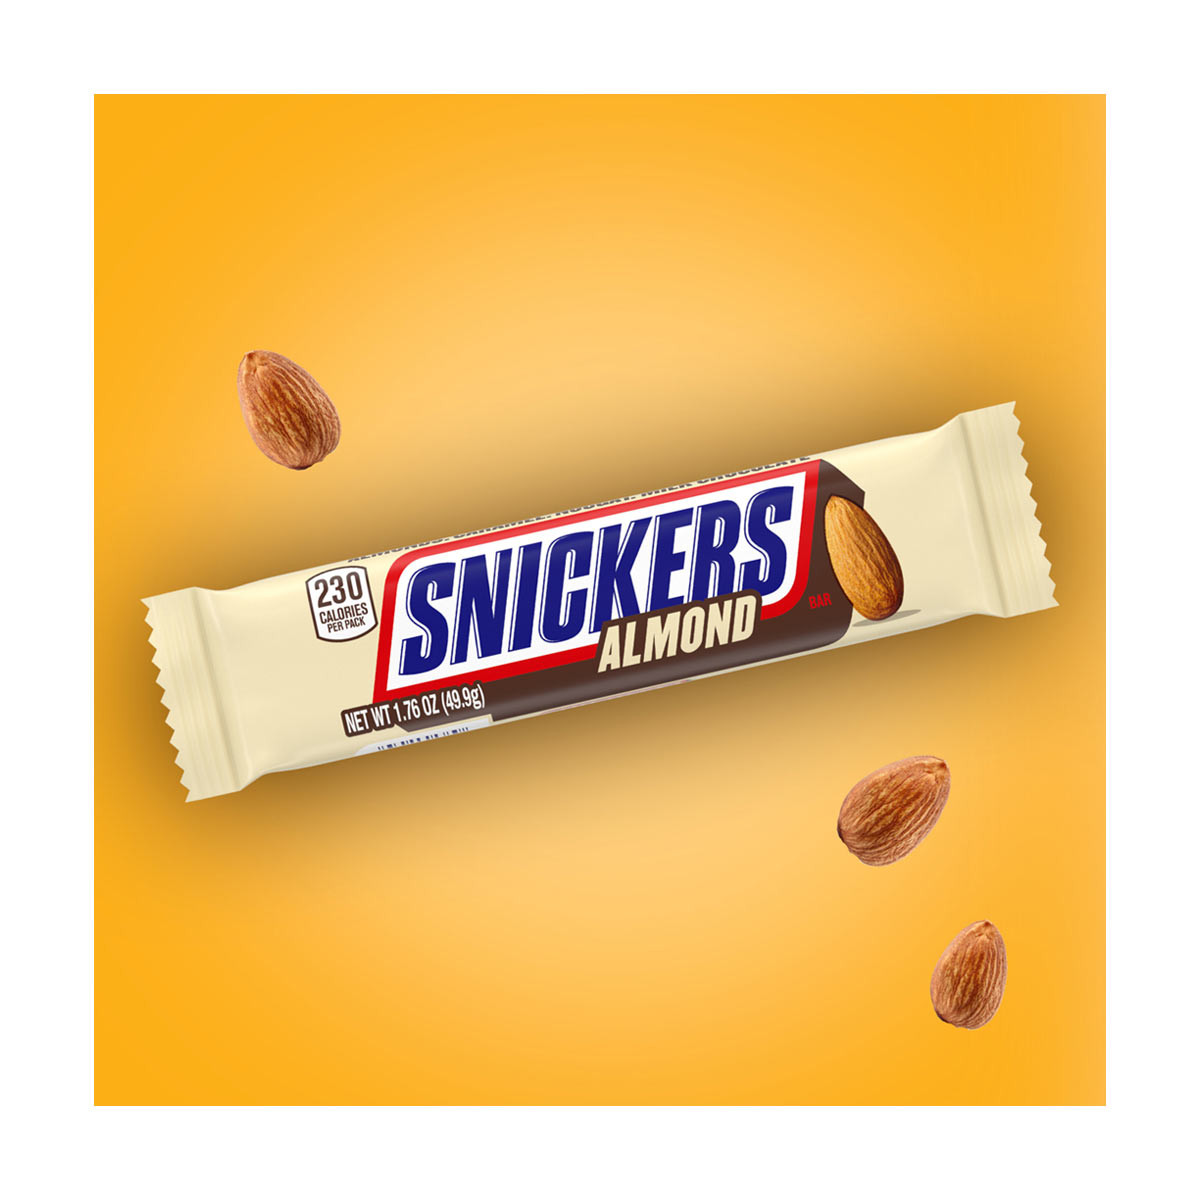 Snickers Almond Single Size Chocolate Candy Bar, 1.76 oz